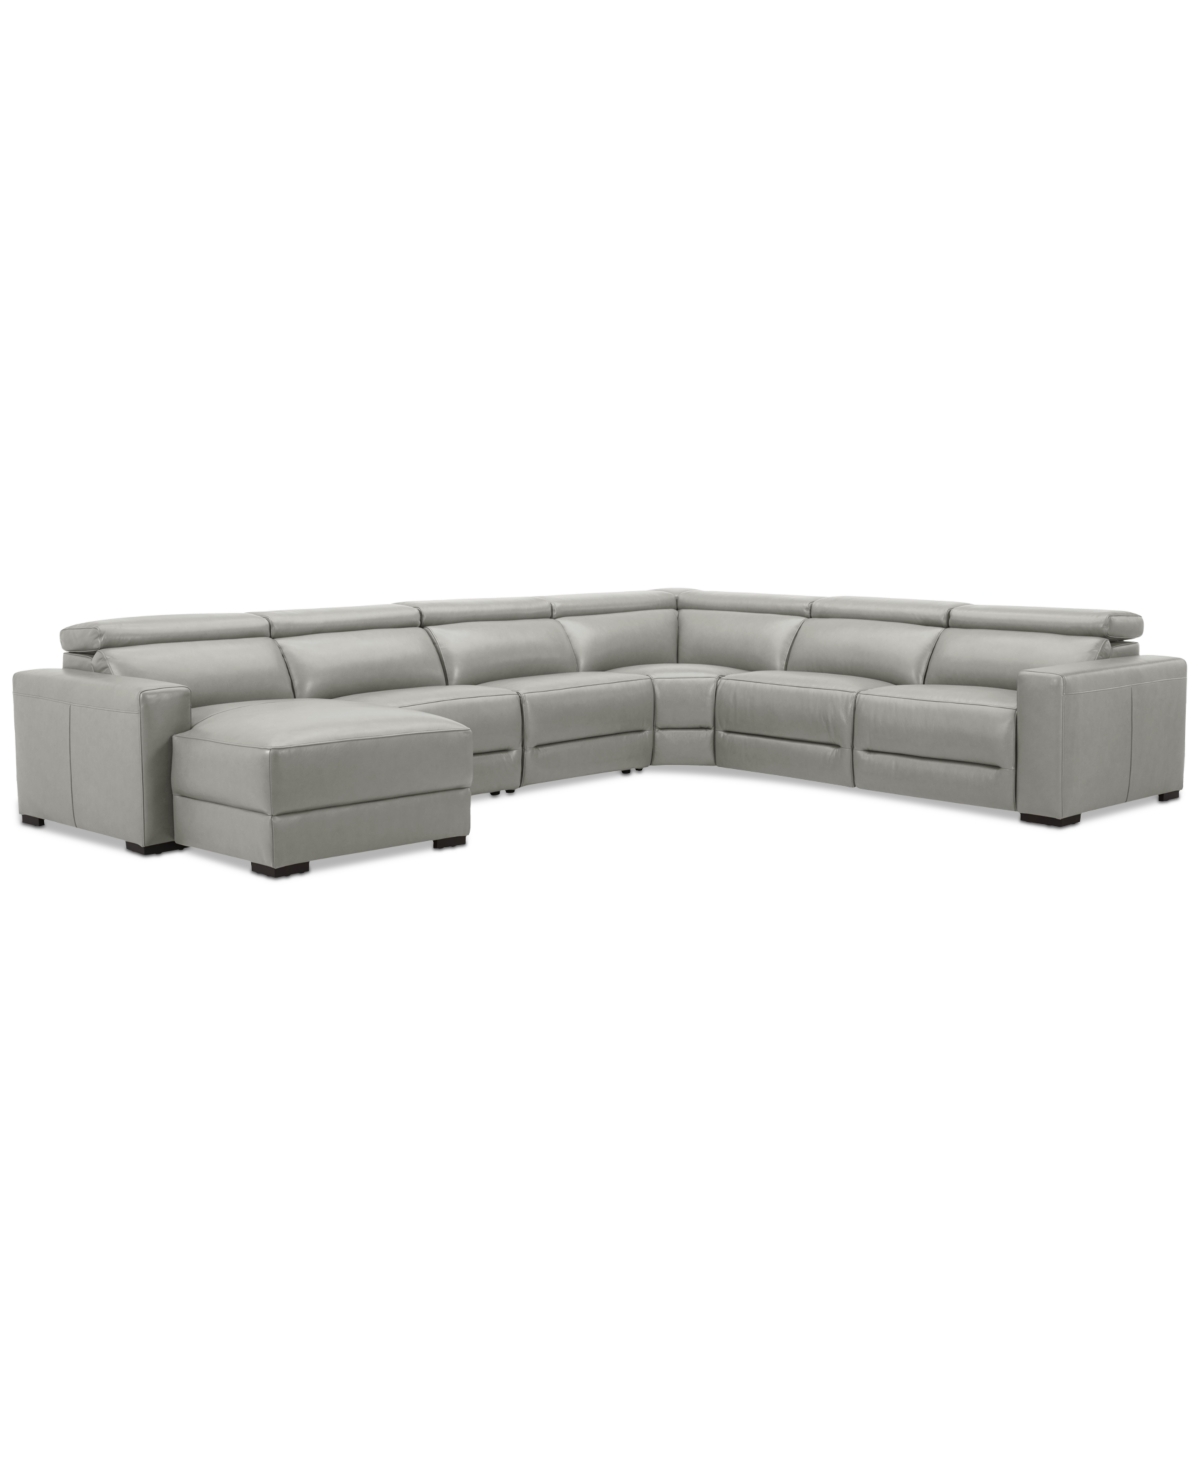 Macy's Nevio 157" 6-pc. Leather Sectional With 2 Power Recliners, Headrests And Chaise, Created For  In Light Grey